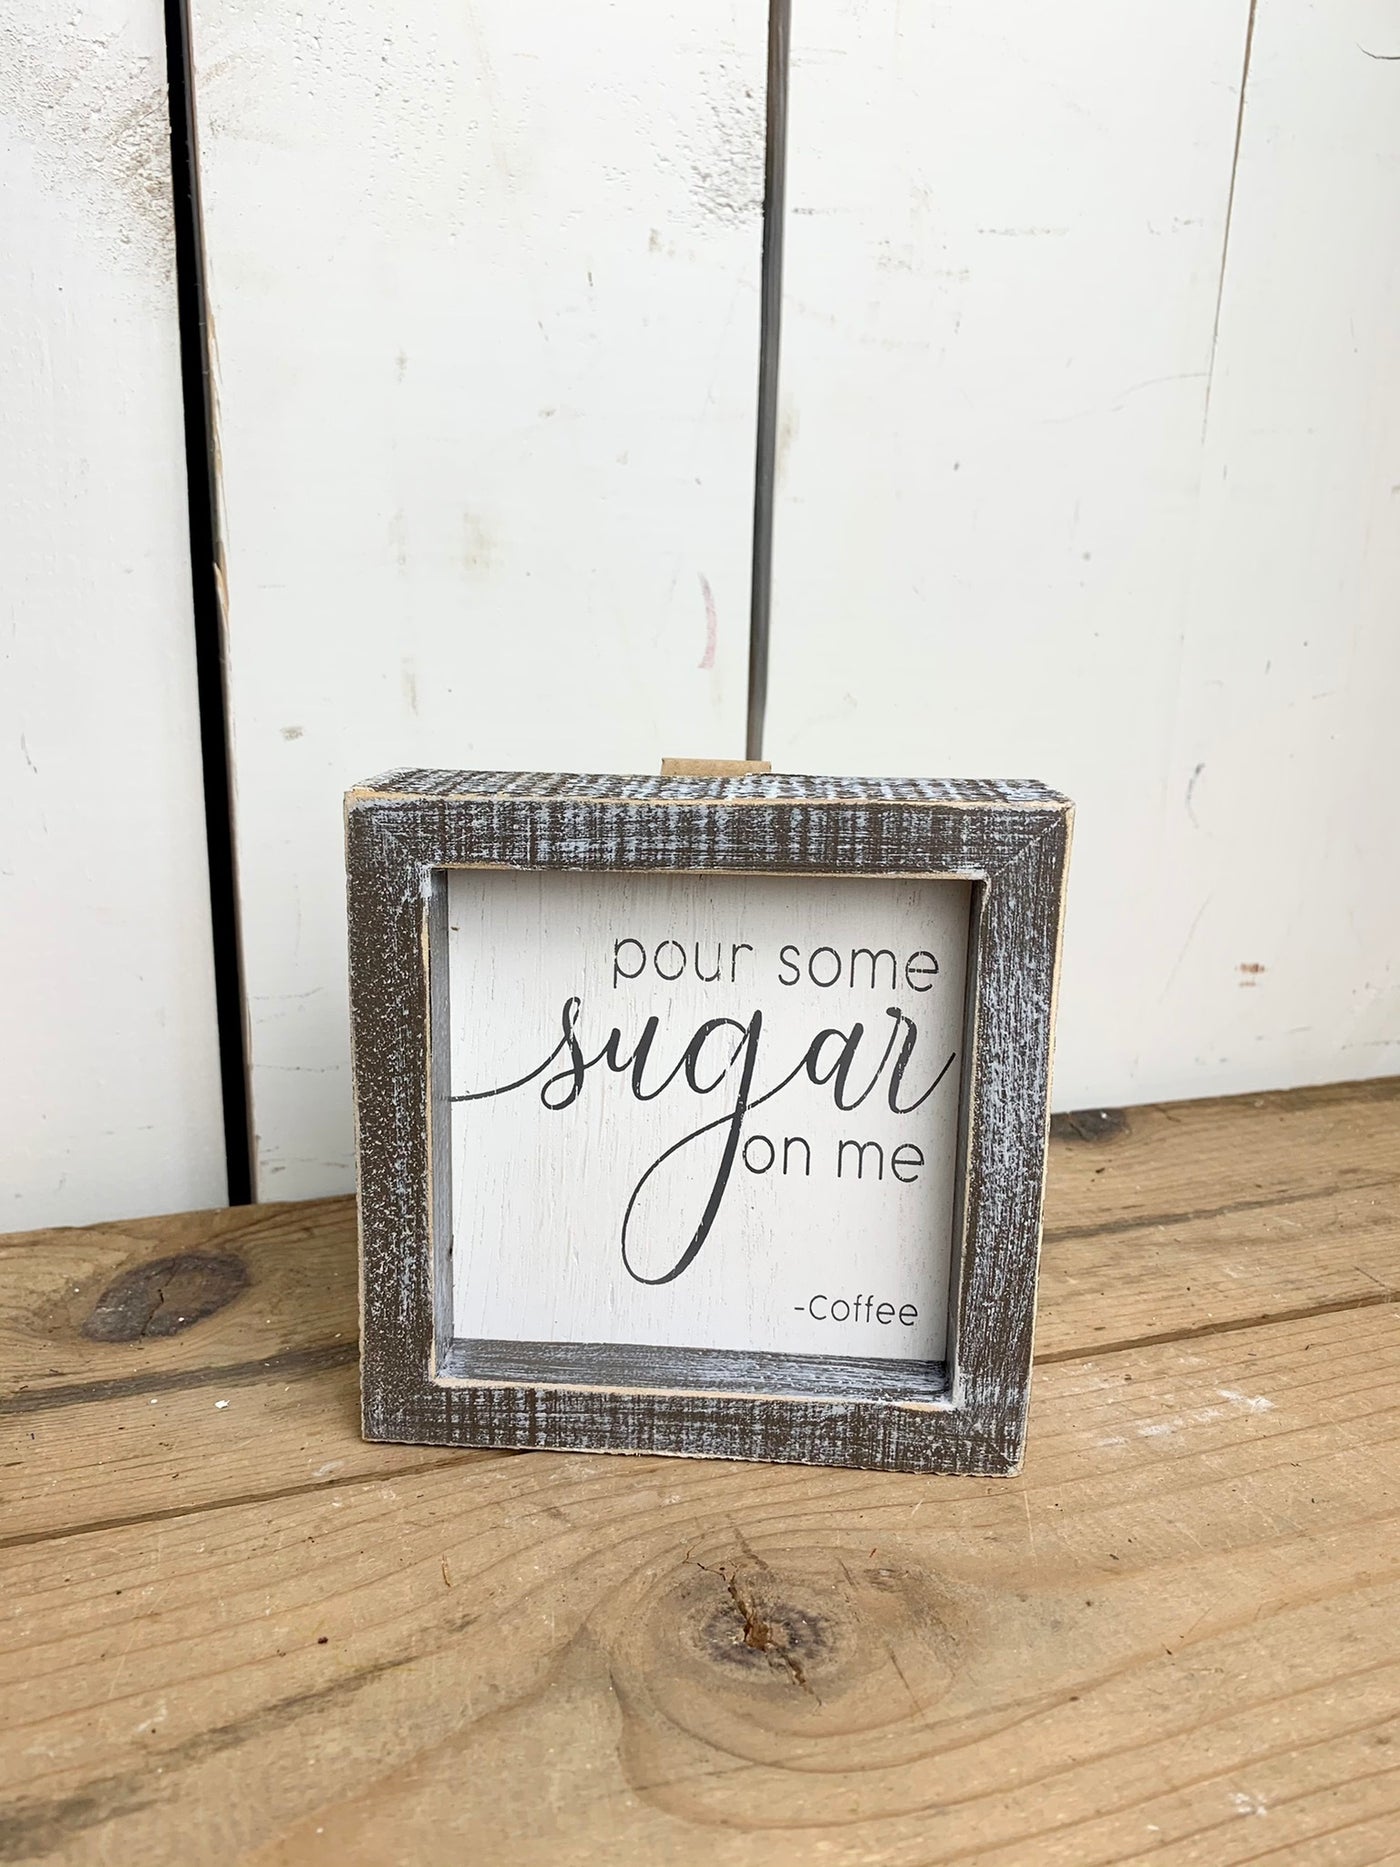 Pour Some Sugar On Me -Coffee Signage